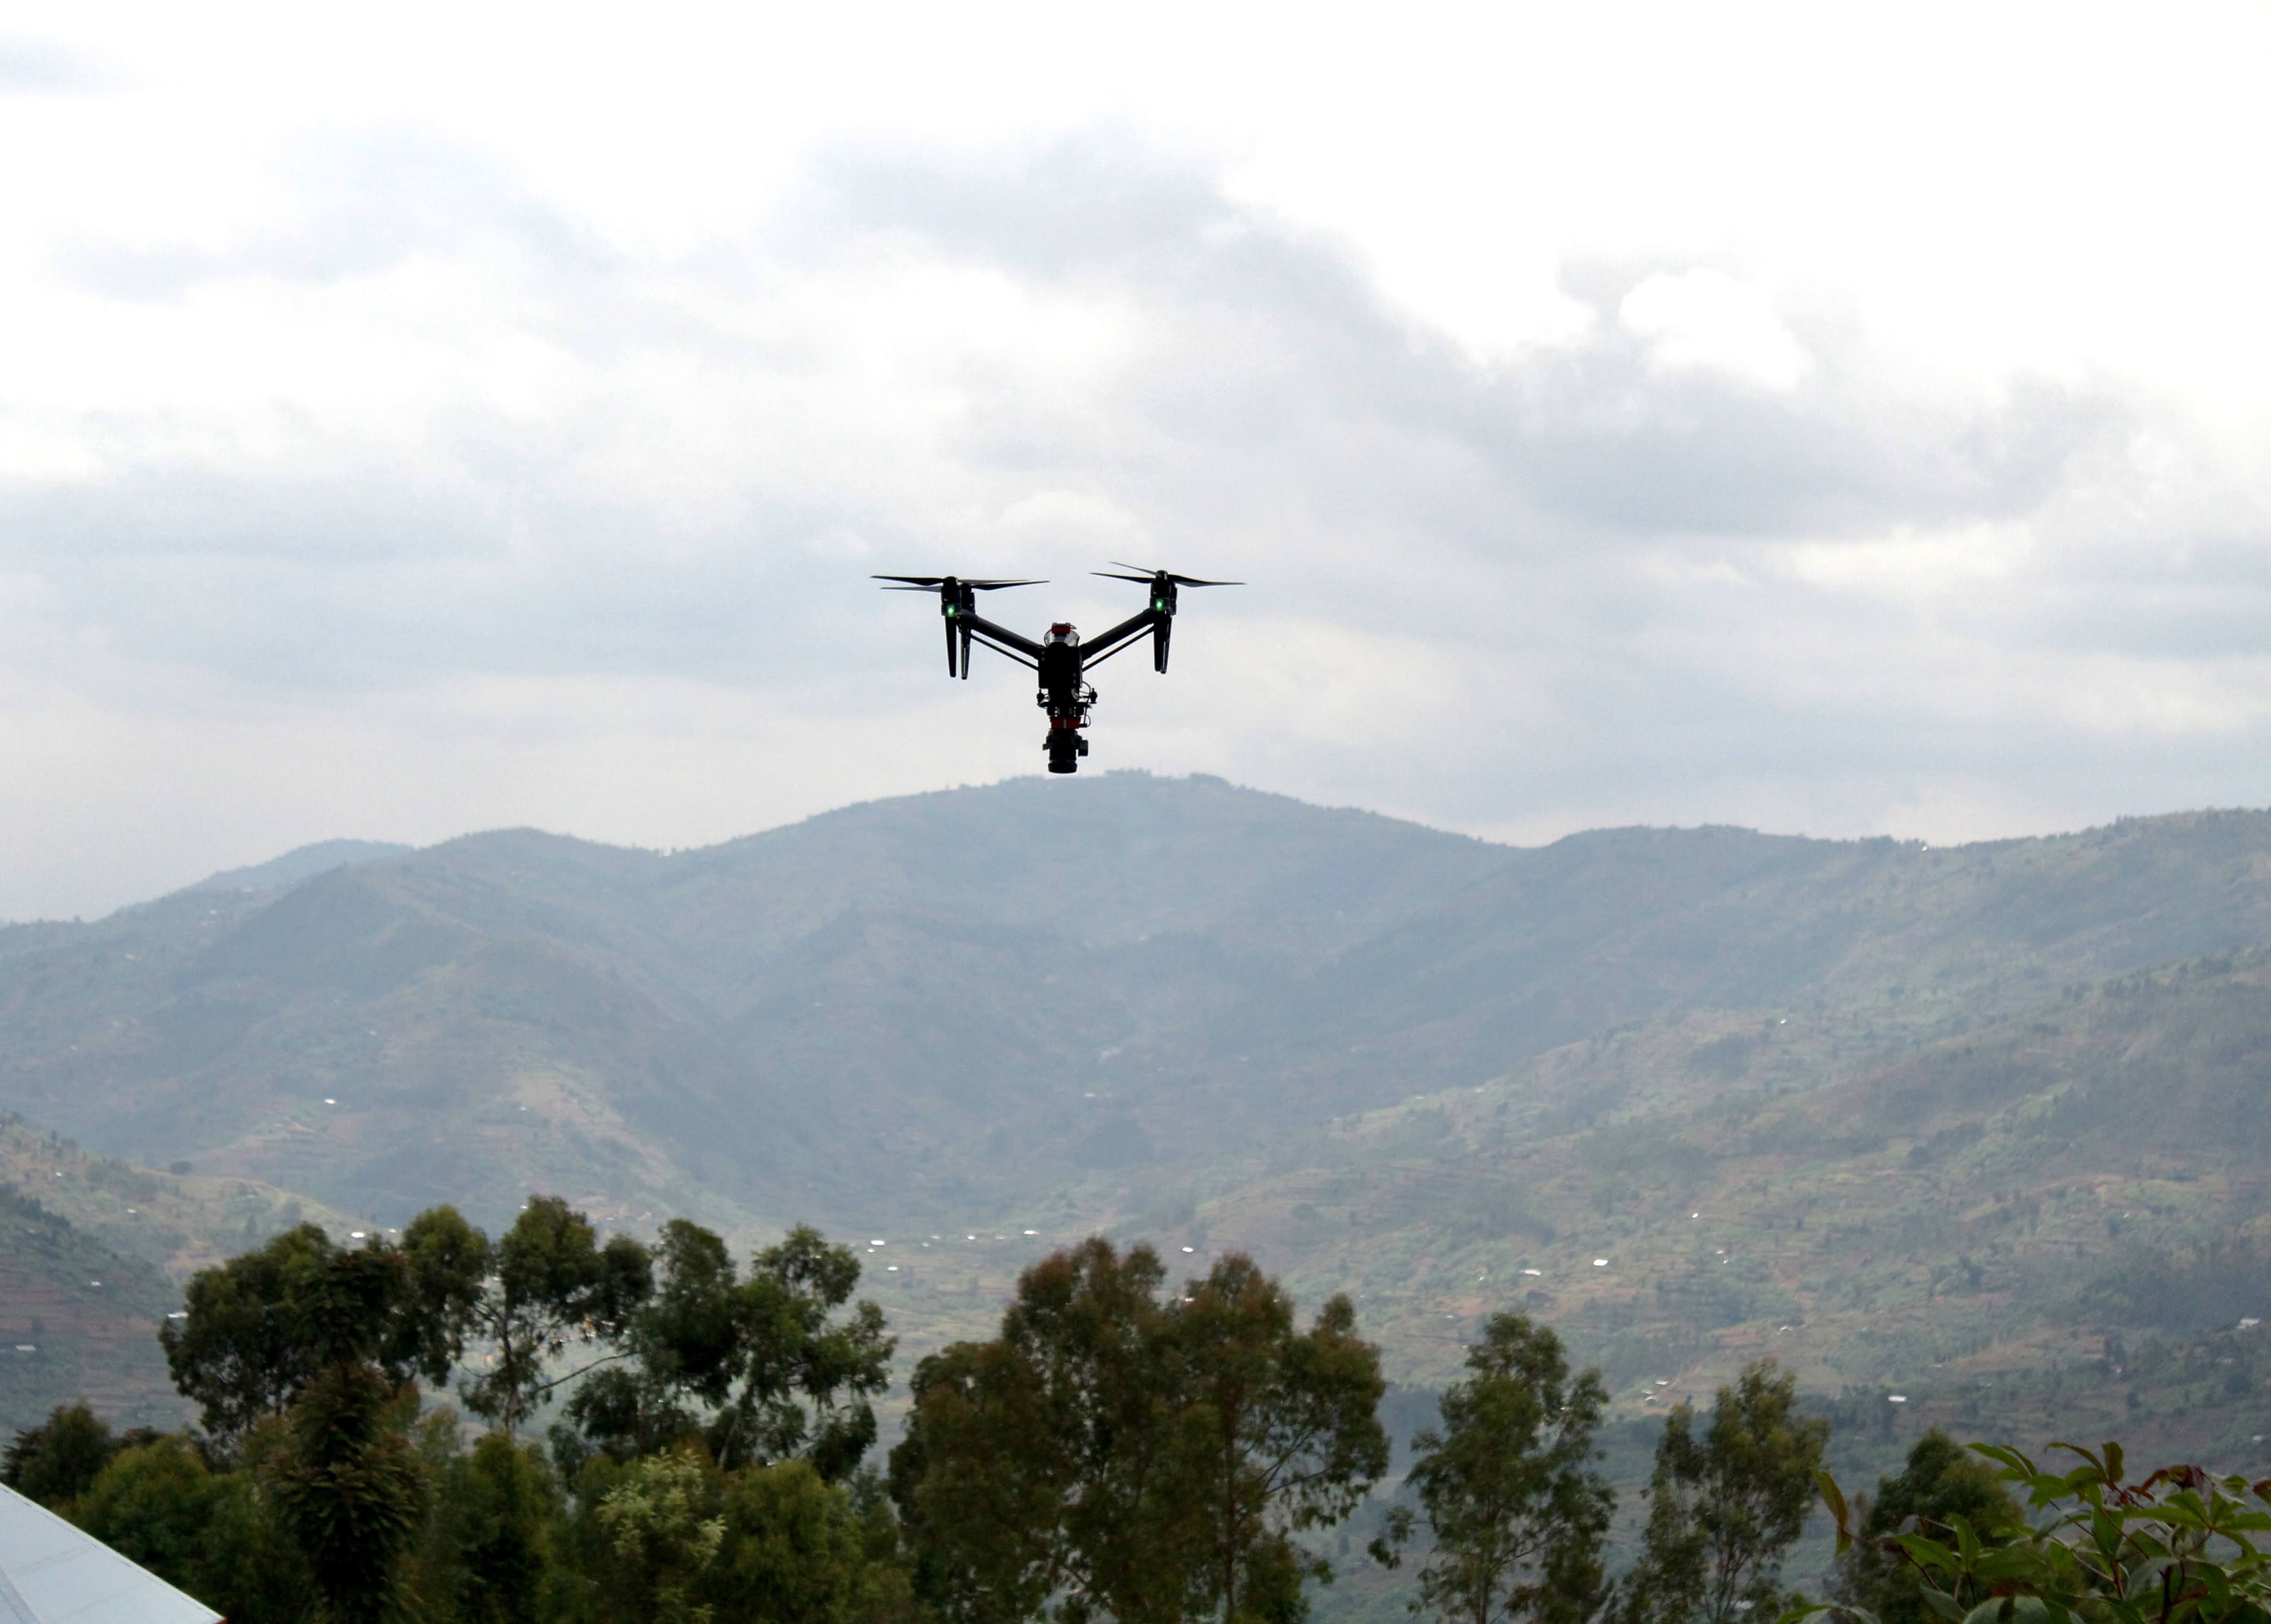 Charis UAS Drone Landscape - A drone takes flight over the iconic hills of Rwanda. Charis UAS drones are used to capture high-quality images of landscapes, giving complete and unique aerial views.